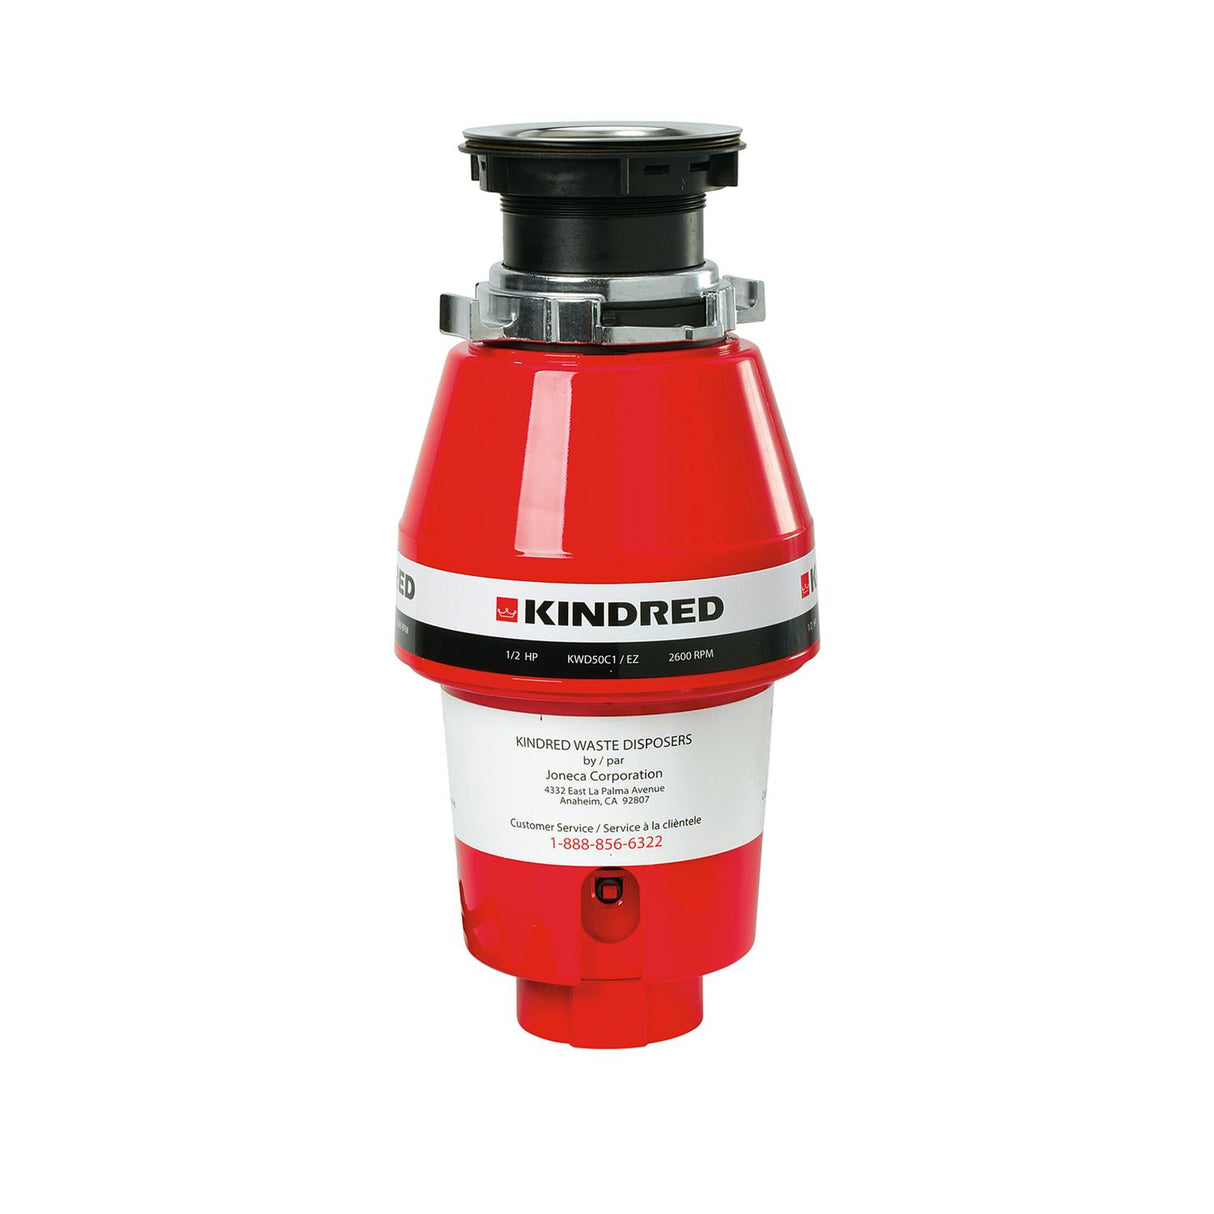 KINDRED KWD50C1-EZ 1/2 Horse Power Continuous Feed Food Waste Disposer